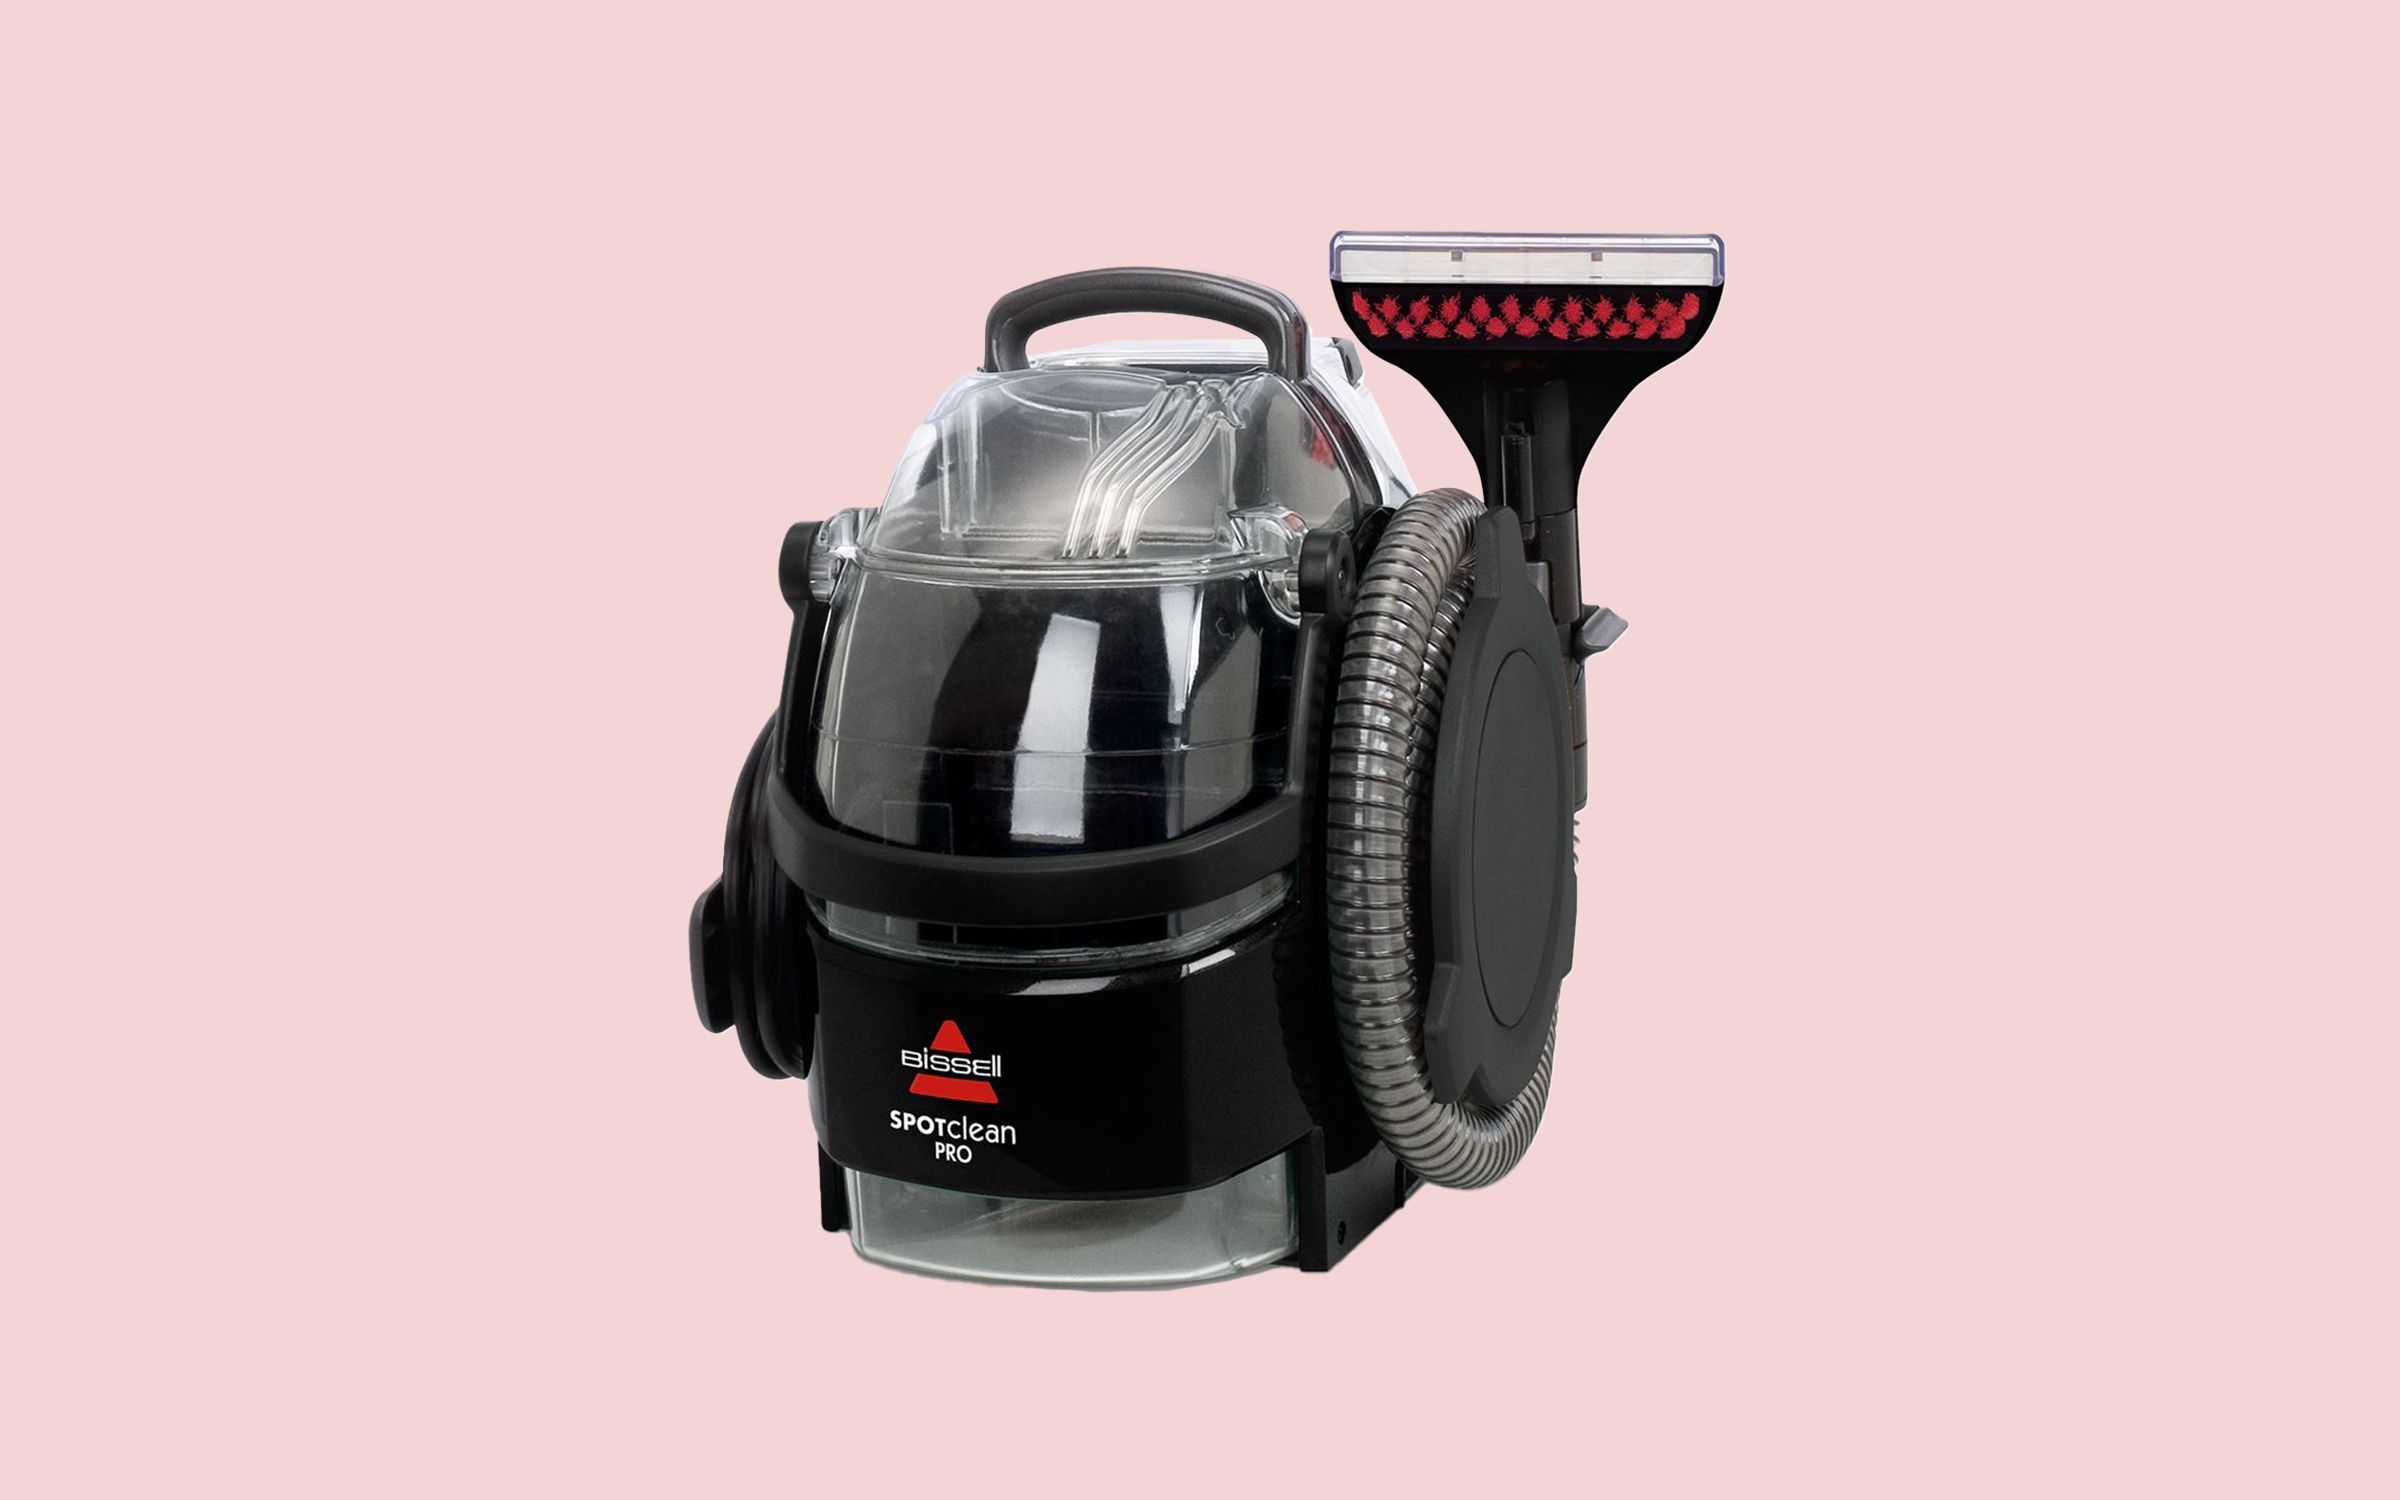 BISSELL SpotClean Pro Spot Cleaner £179.99